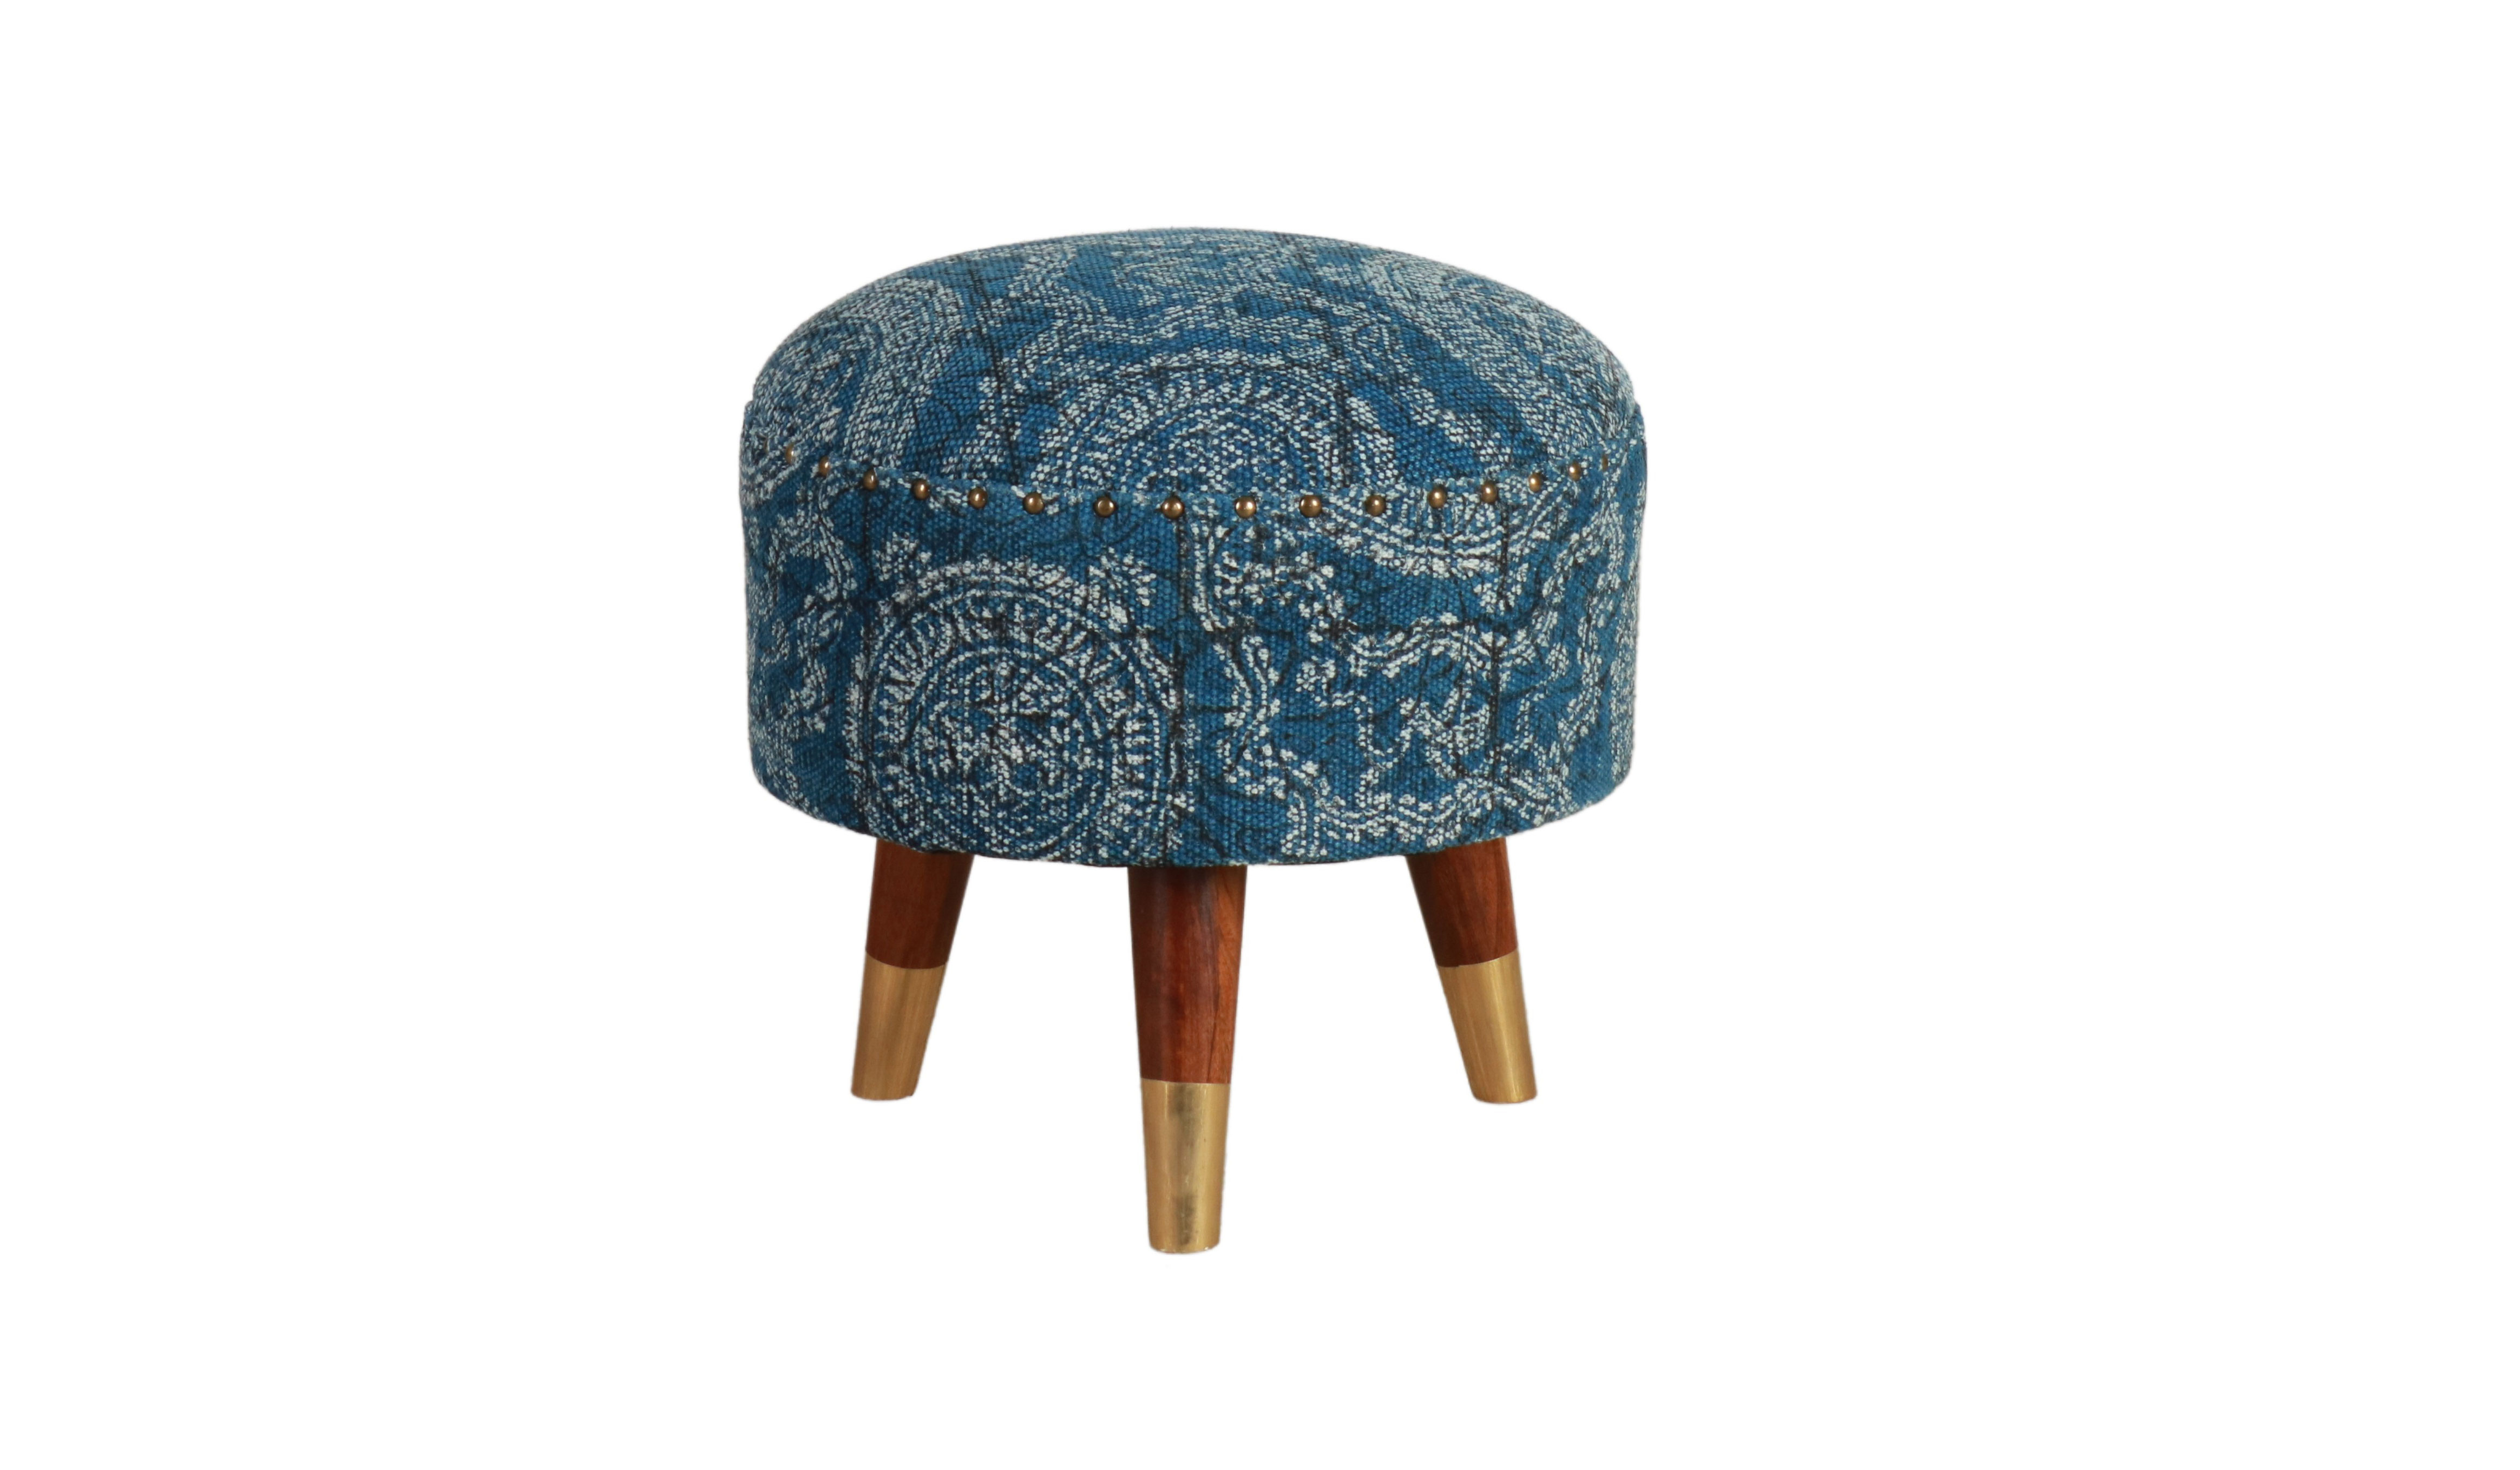 Block & Chisel round blue and white cotton upholstered stool